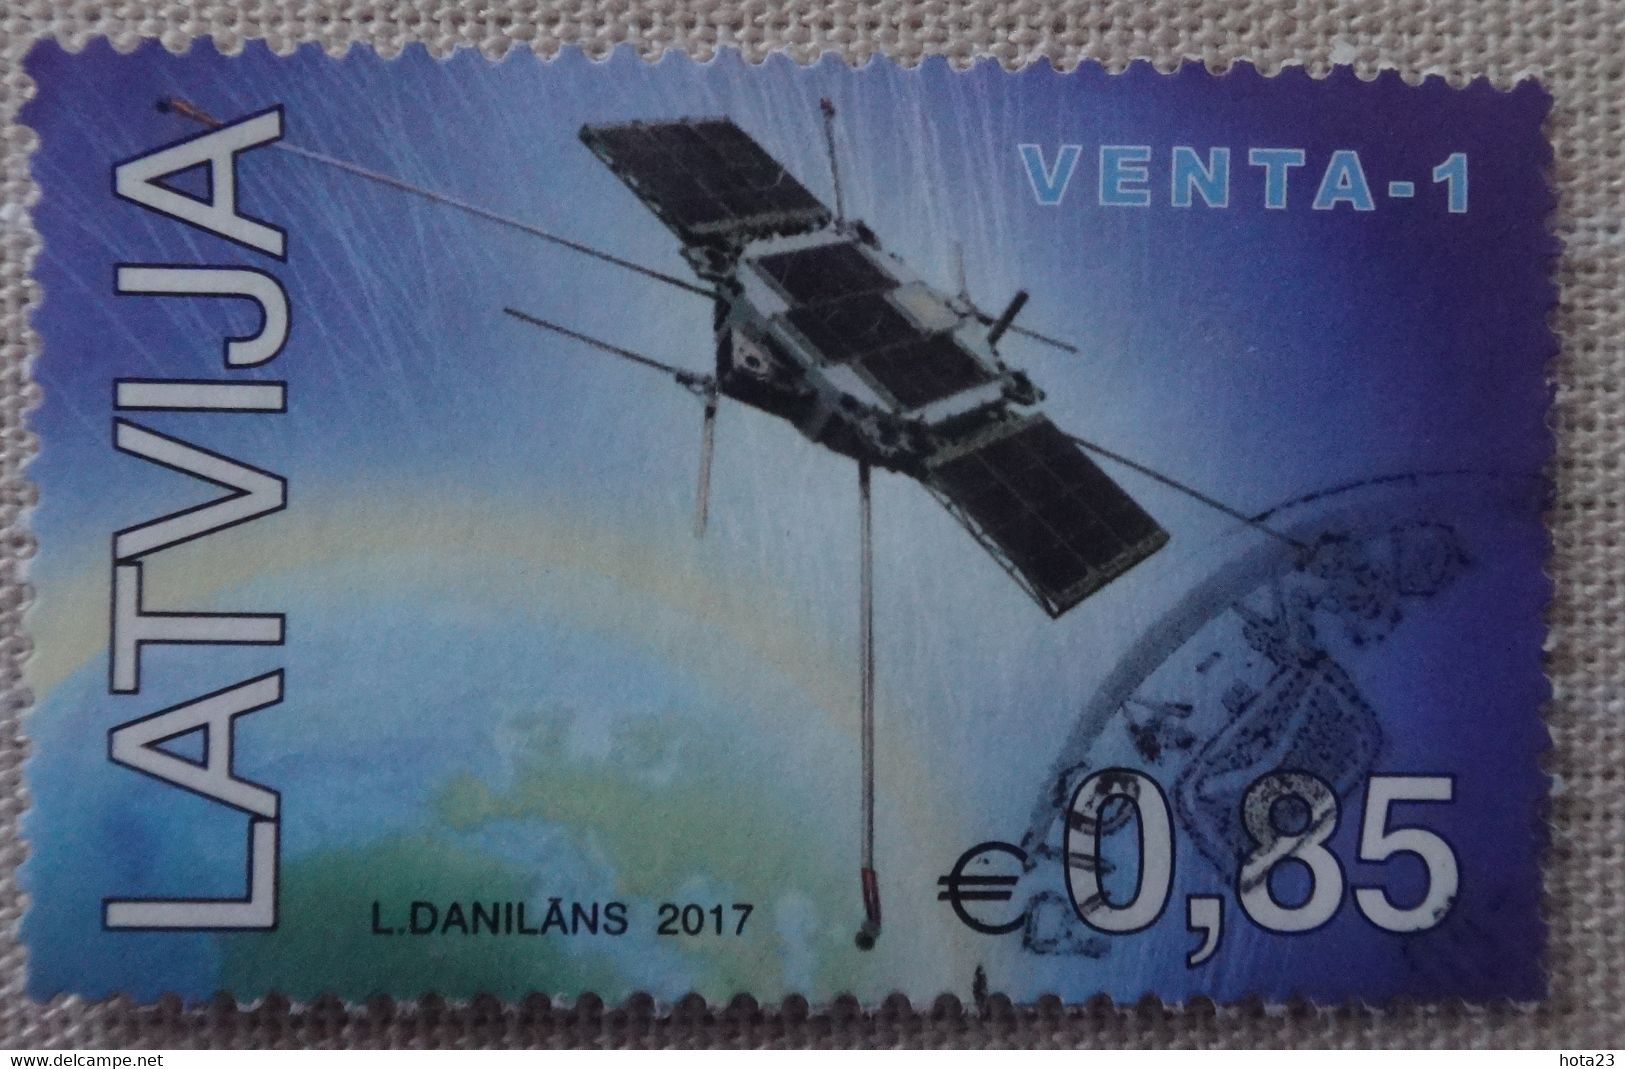 Latvia 2017 Latvian First Artificial Earth Satellite Venta-1 - Stamp USED (0) - Lettland